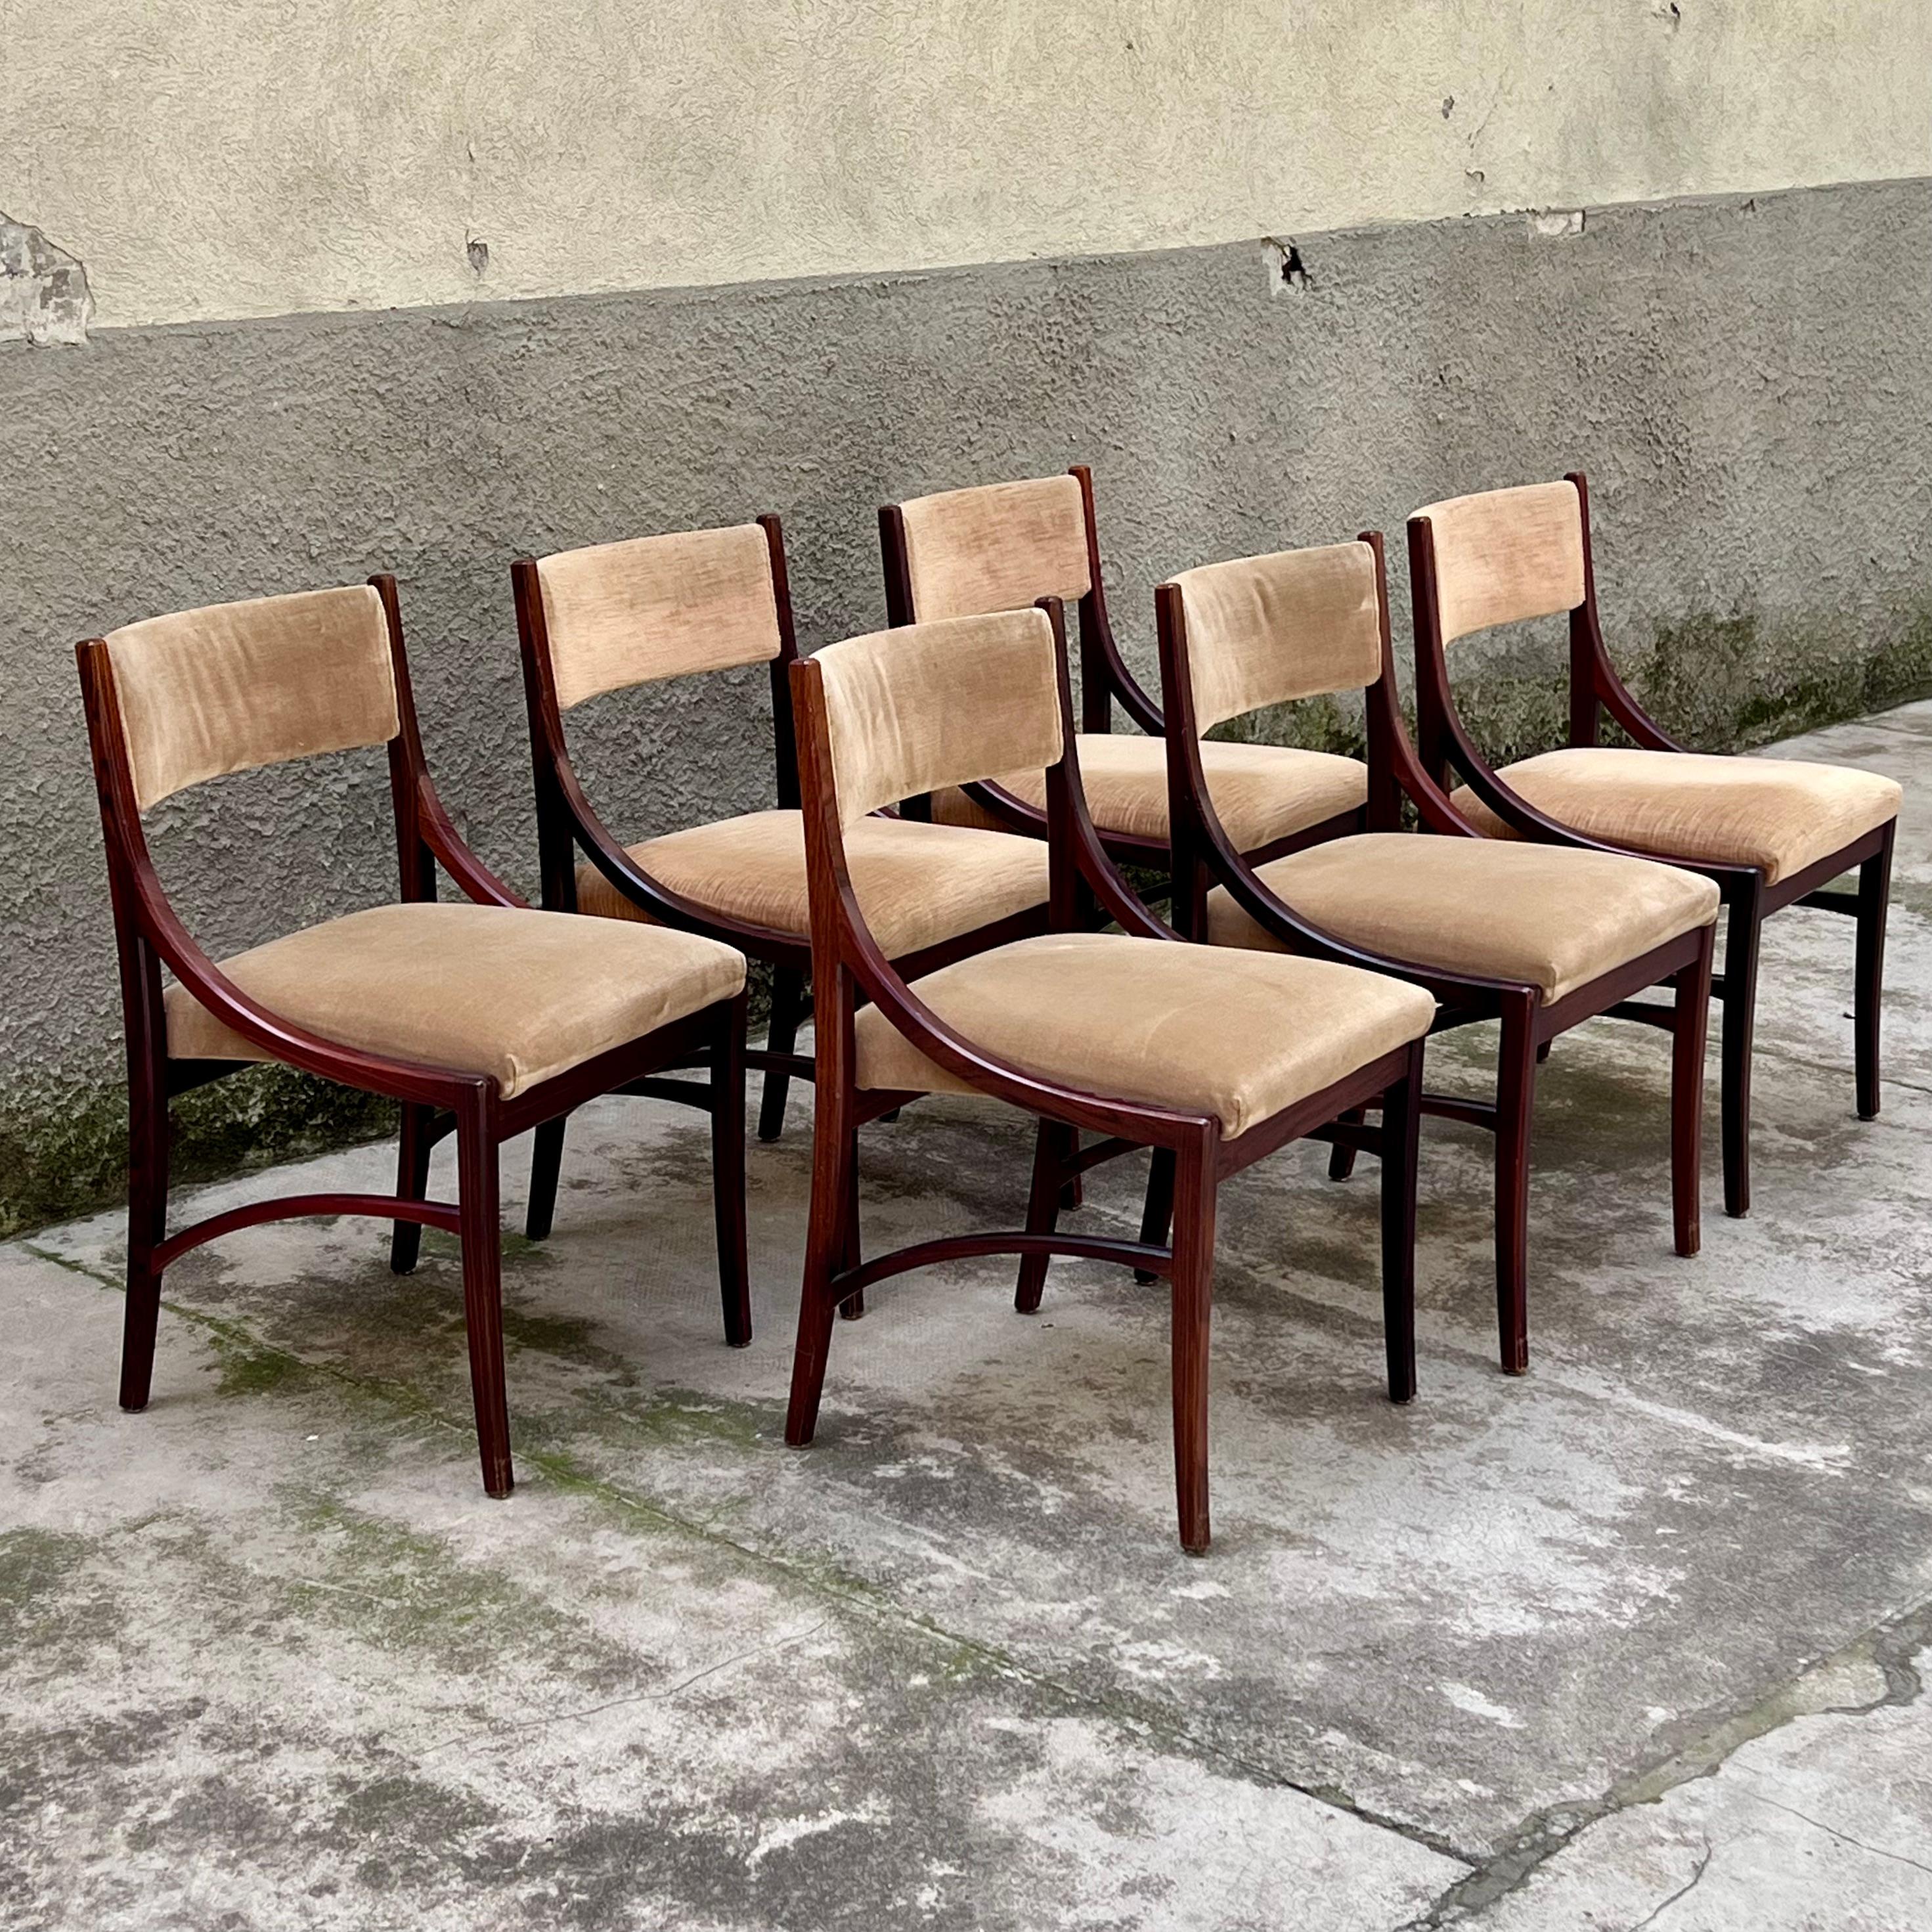 Beautiful set of six chairs in elegant mahogany and comfortable hazelnut-colored velvet born from the pencil of Ico Parisi and made since the 1960s, by the prestigious Cassina company, perhaps the best known in terms of emblazoned collaborations and